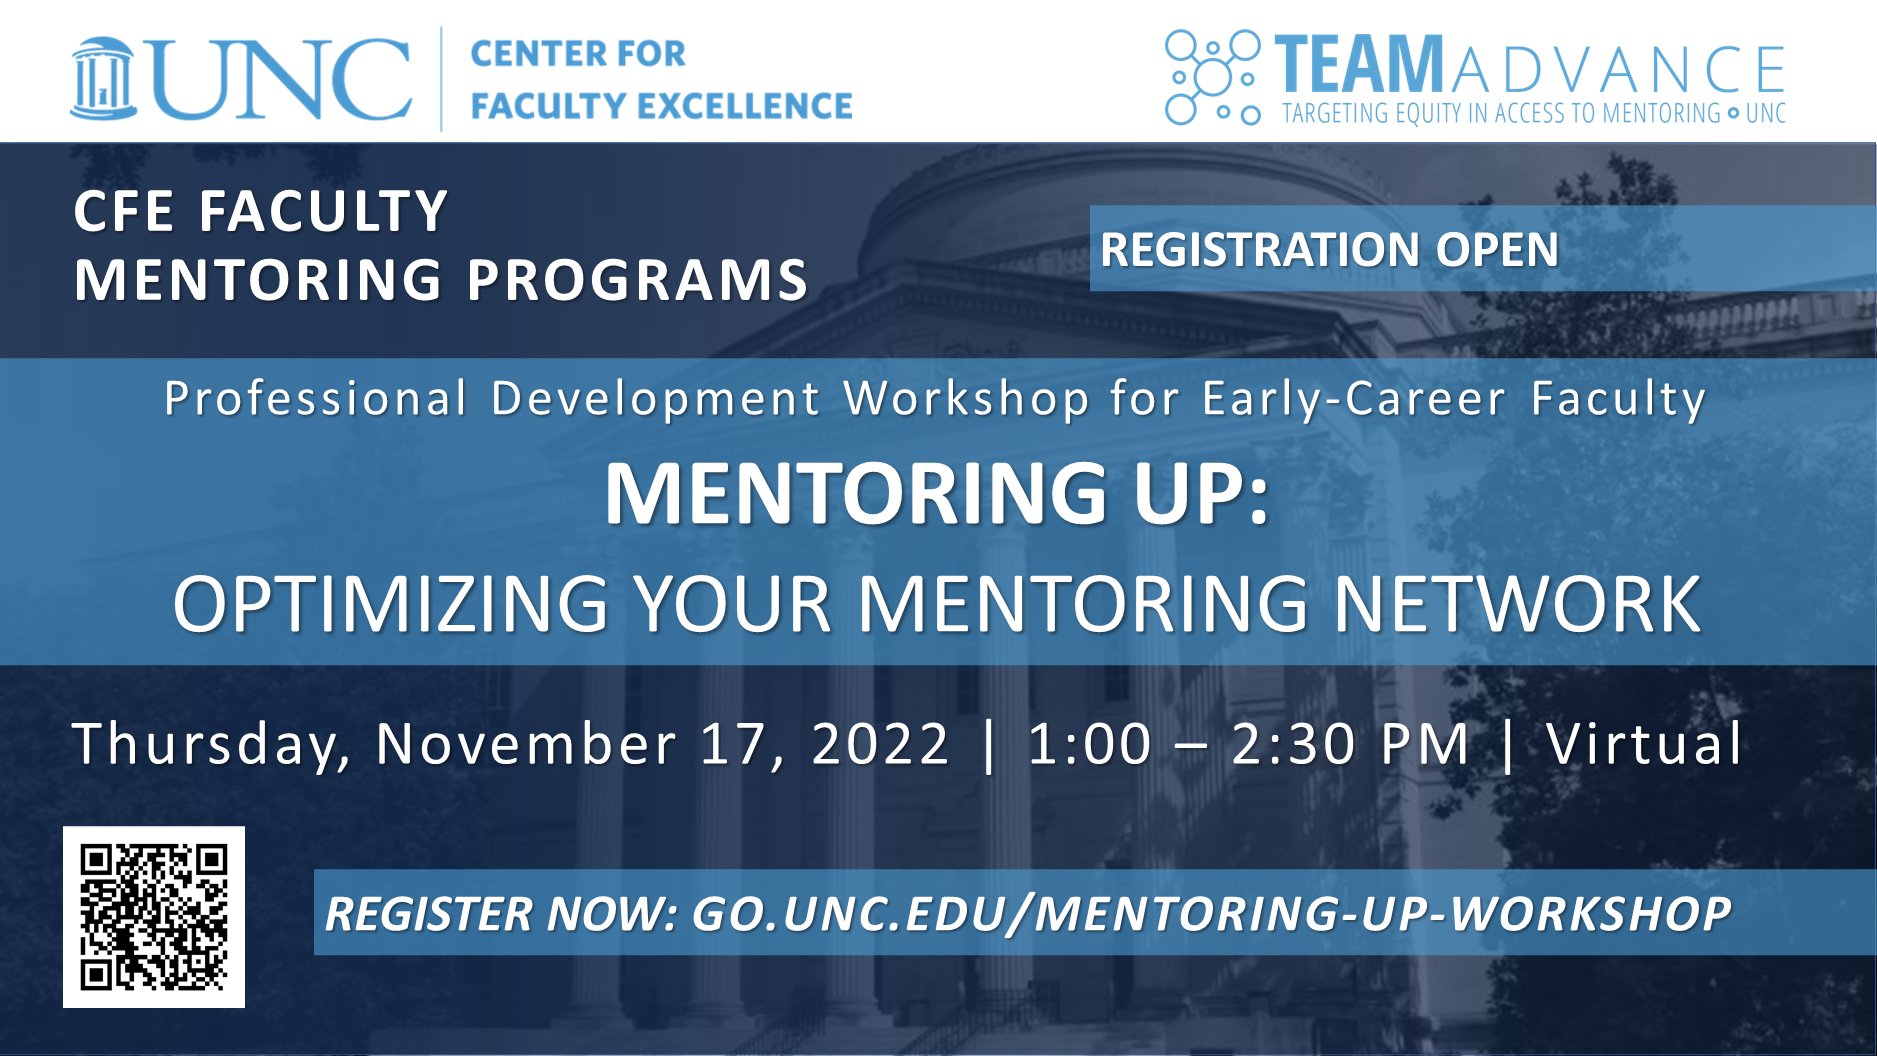 Join us for our next early-career faculty professional development workshop: Mentoring Up: Optimizing Your Mentoring Network Nov 17, 2022, 1-2:30 PM